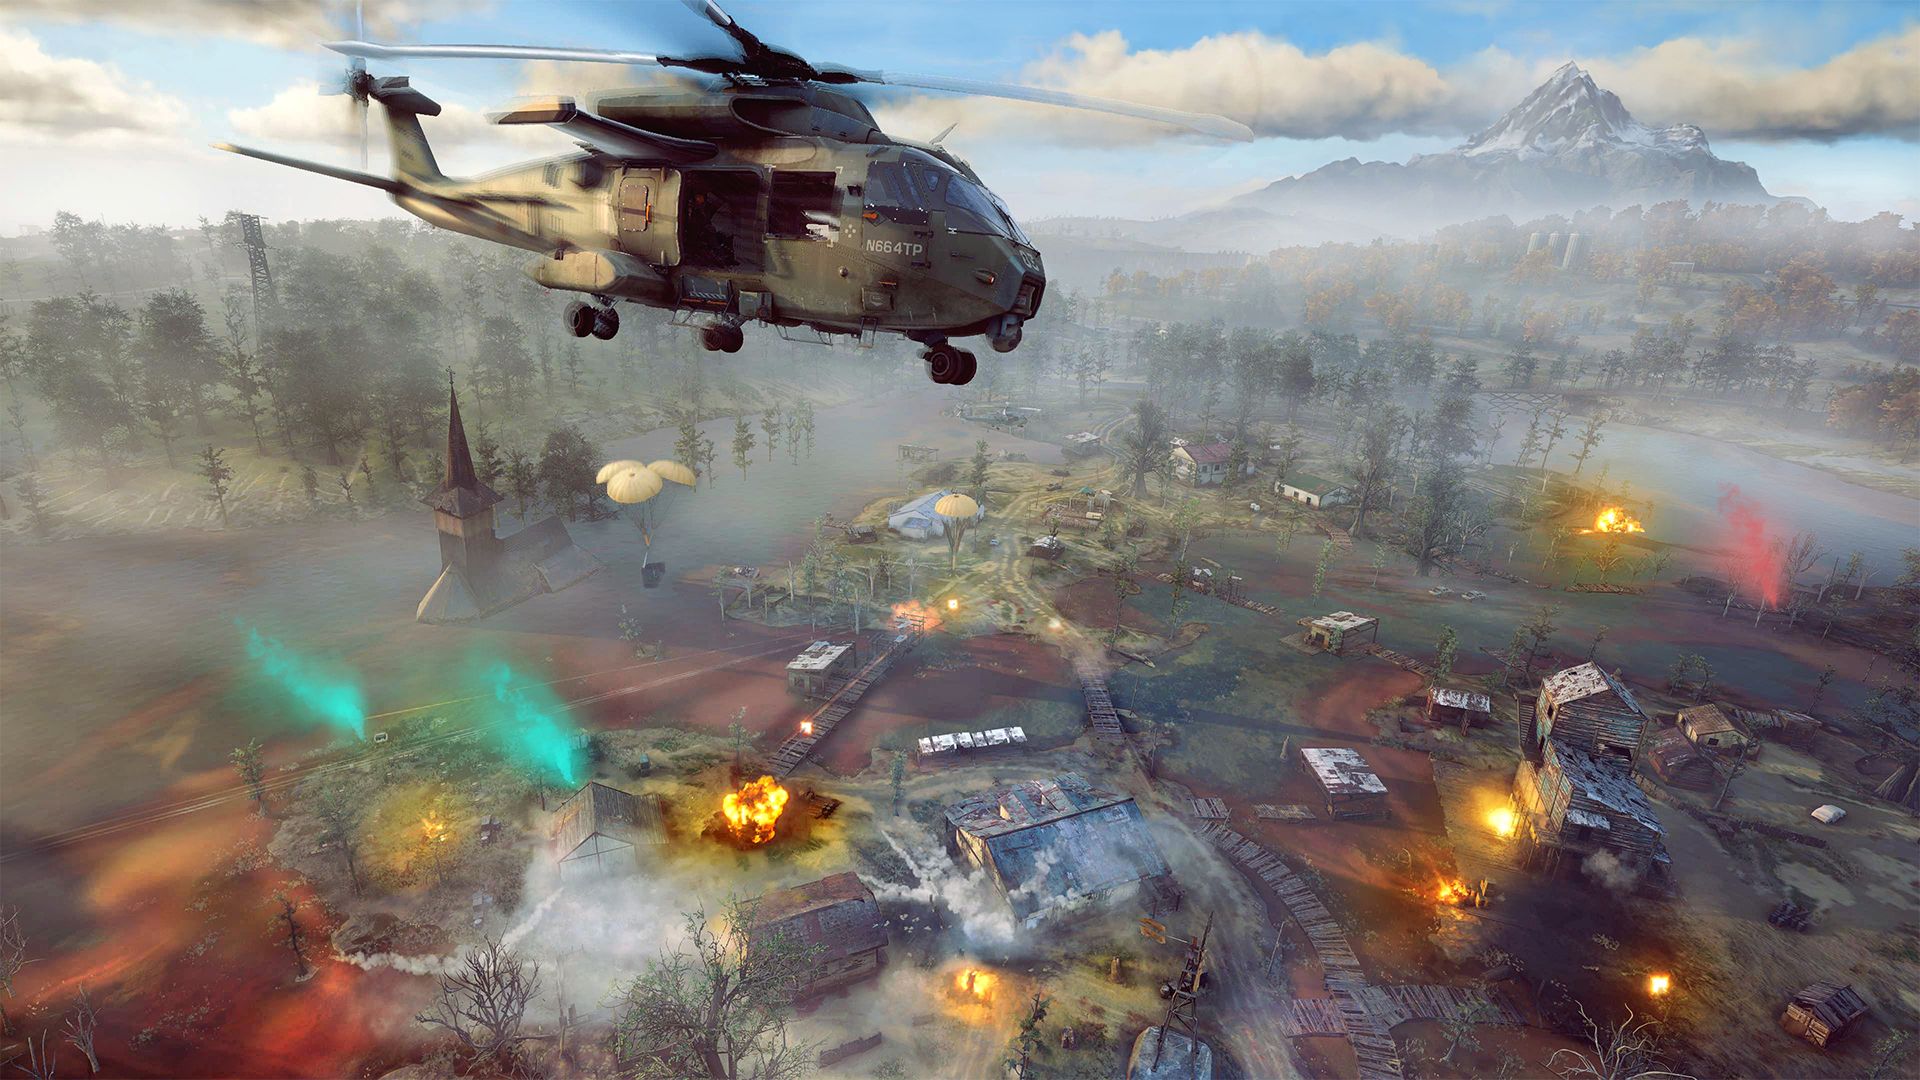 Video game screenshot of a helicopter over a battle being waged in a forest